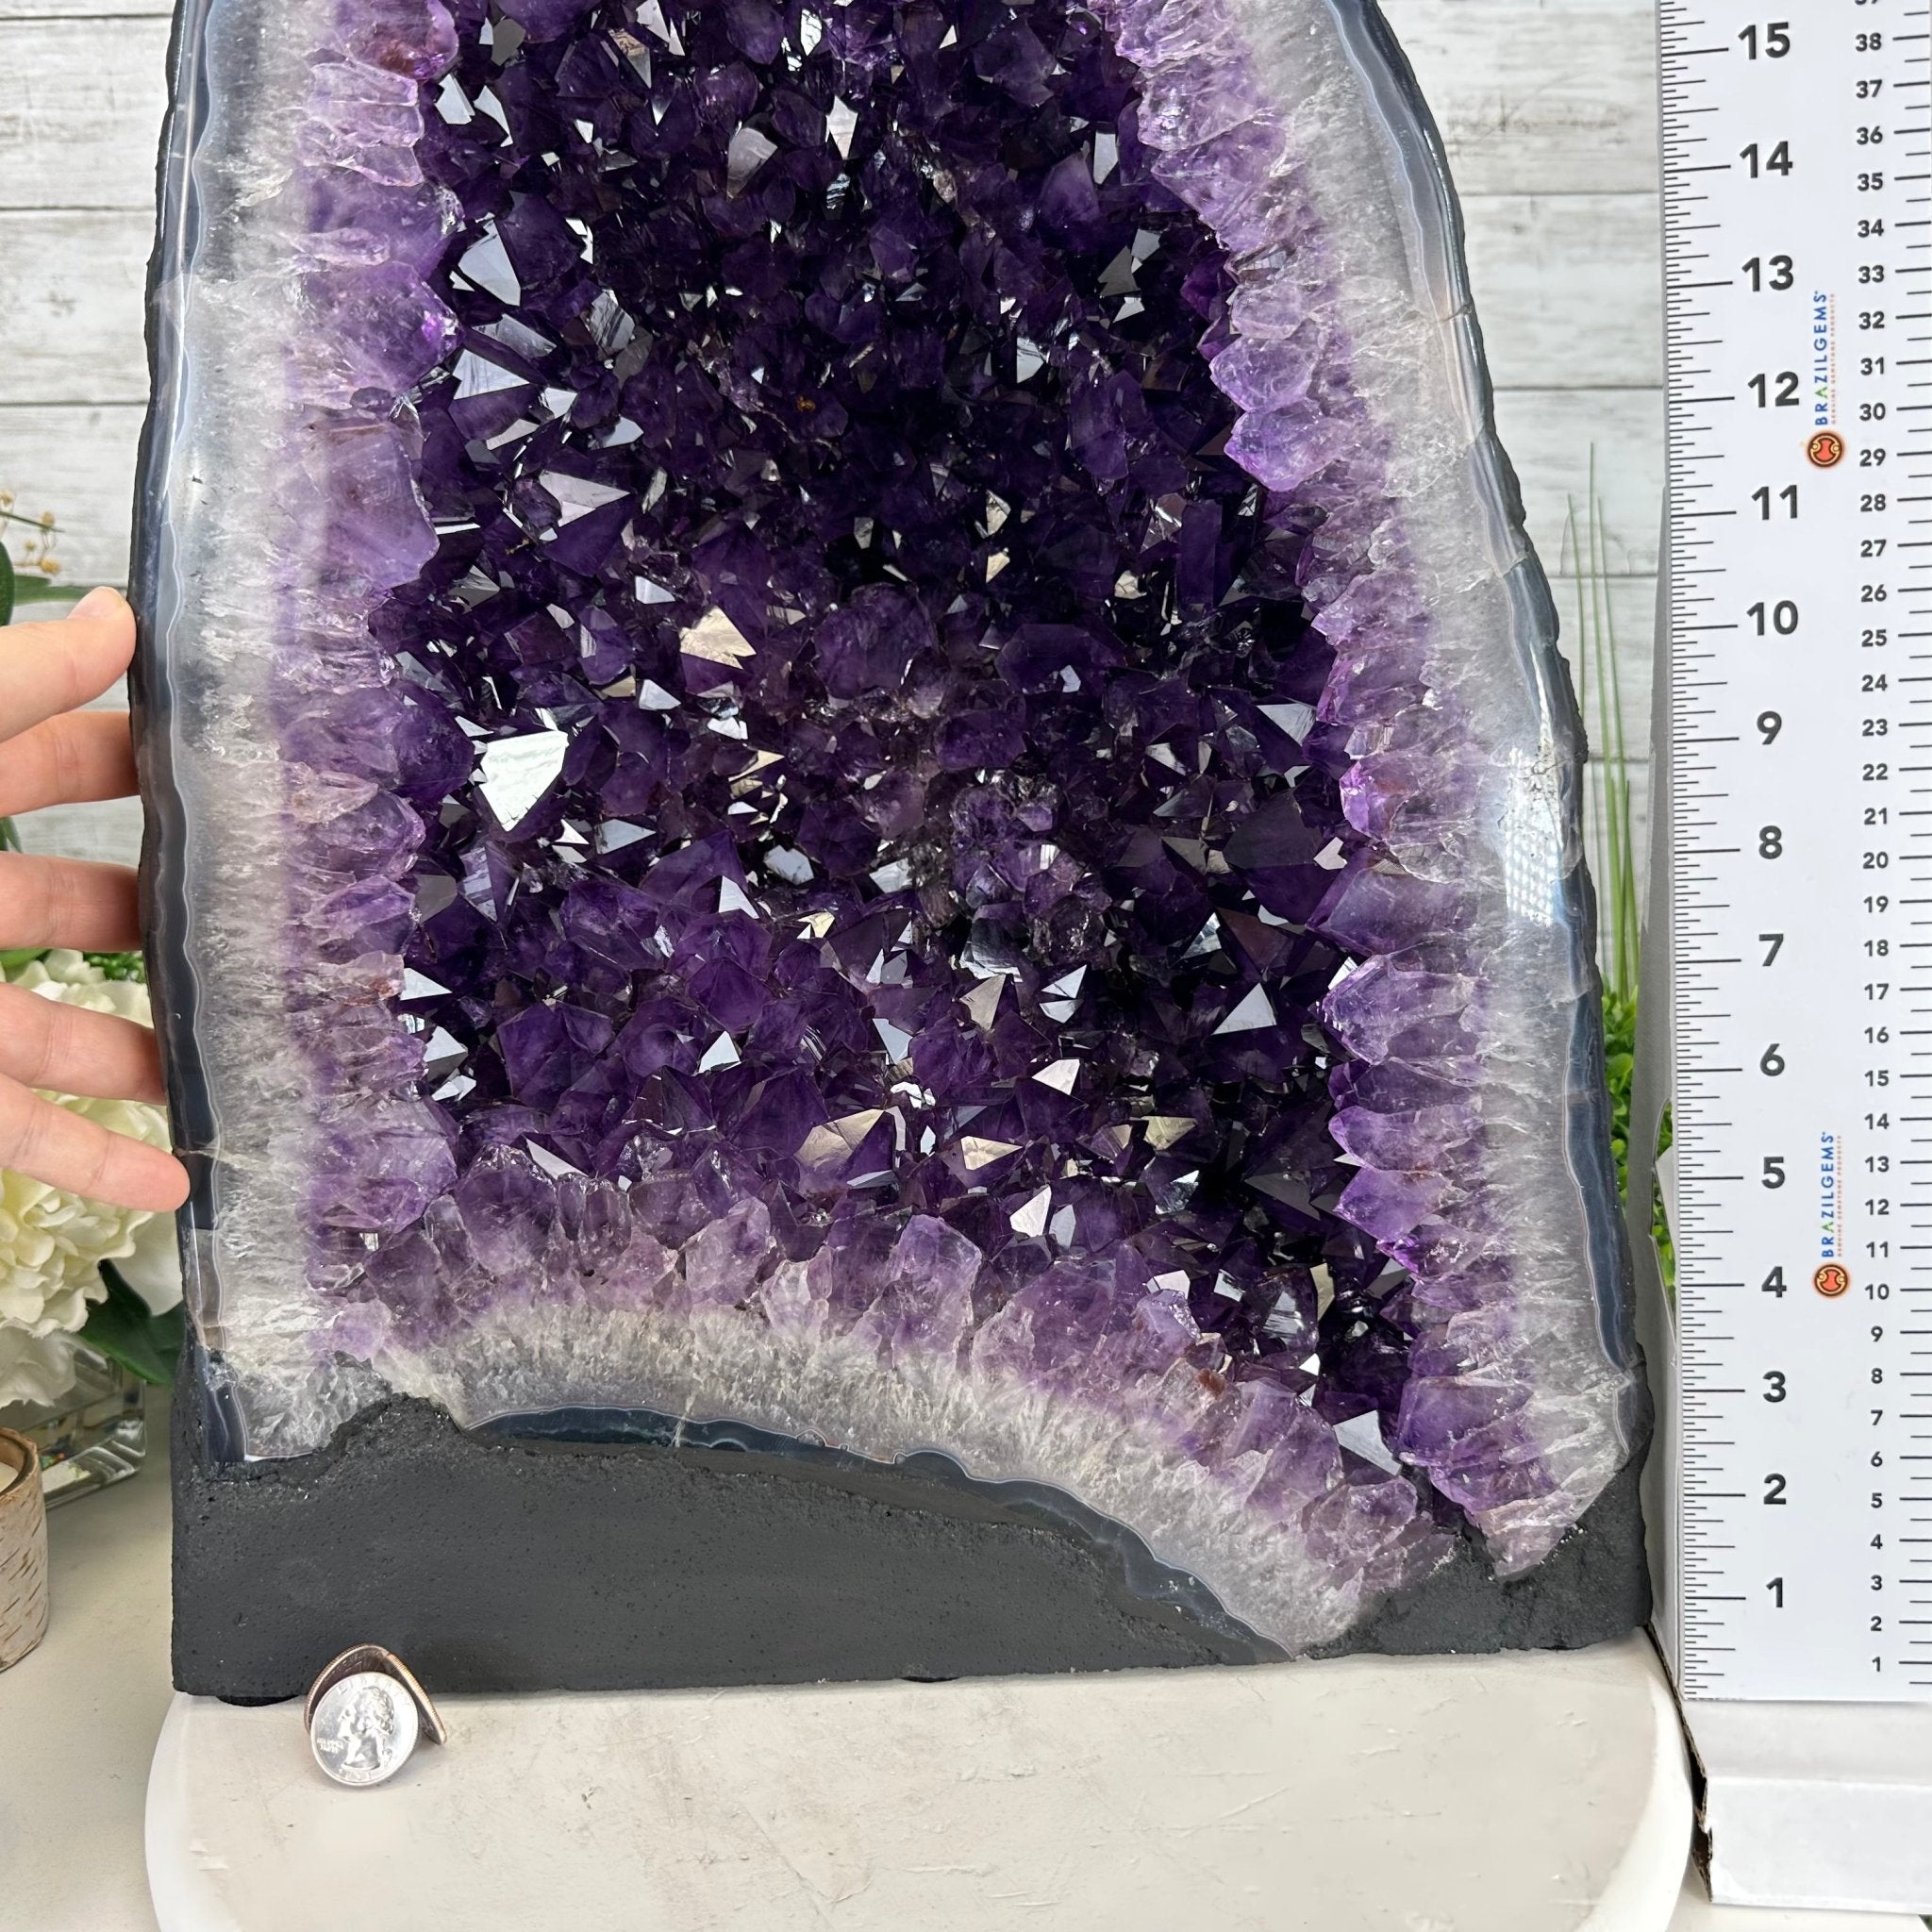 Super Quality Brazilian Amethyst Cathedral, 93.2 lbs & 22.1" Tall, Model #5601-1181 by Brazil Gems - Brazil GemsBrazil GemsSuper Quality Brazilian Amethyst Cathedral, 93.2 lbs & 22.1" Tall, Model #5601-1181 by Brazil GemsCathedrals5601-1181